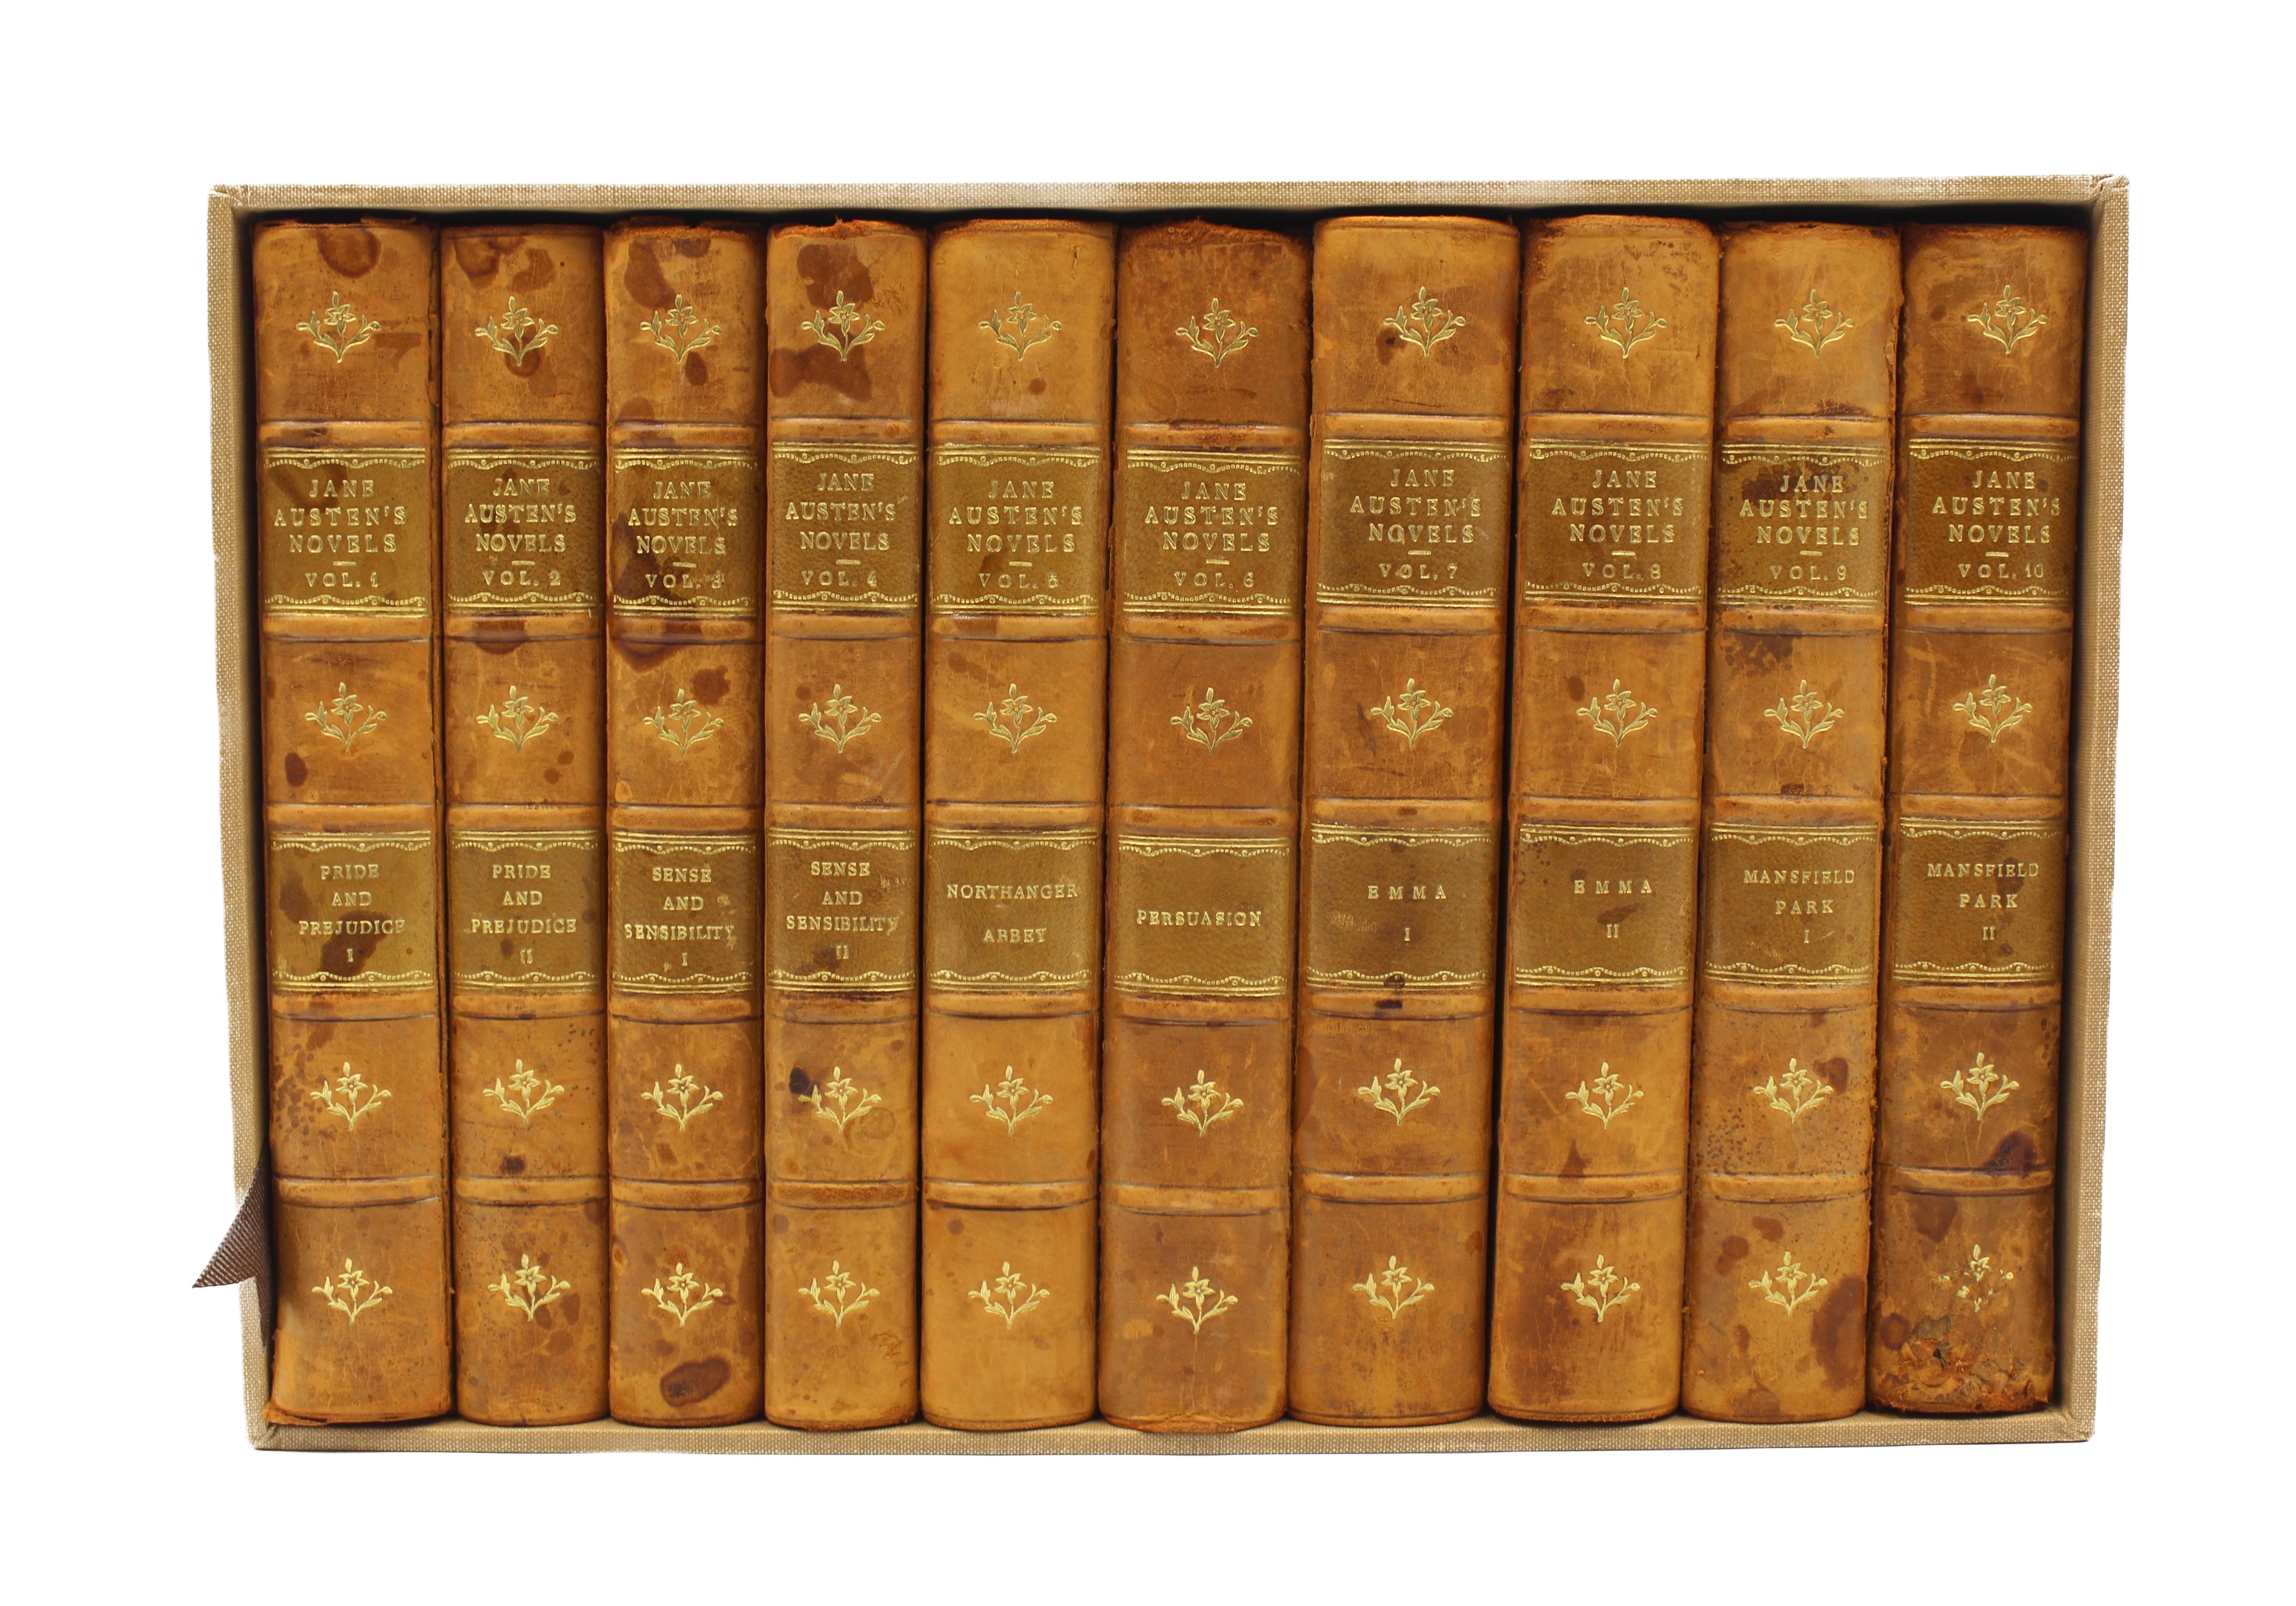 Austen, Jane. The Novels of Jane Austen. London: Chatto & Windus, 1908-1909. 10 volume set. Introduction by R. Brimley Johnson. Illustrated with color plates by Arthur Wallis Mills. Octavo. In period half leather boards, raised bands, gilt titles,